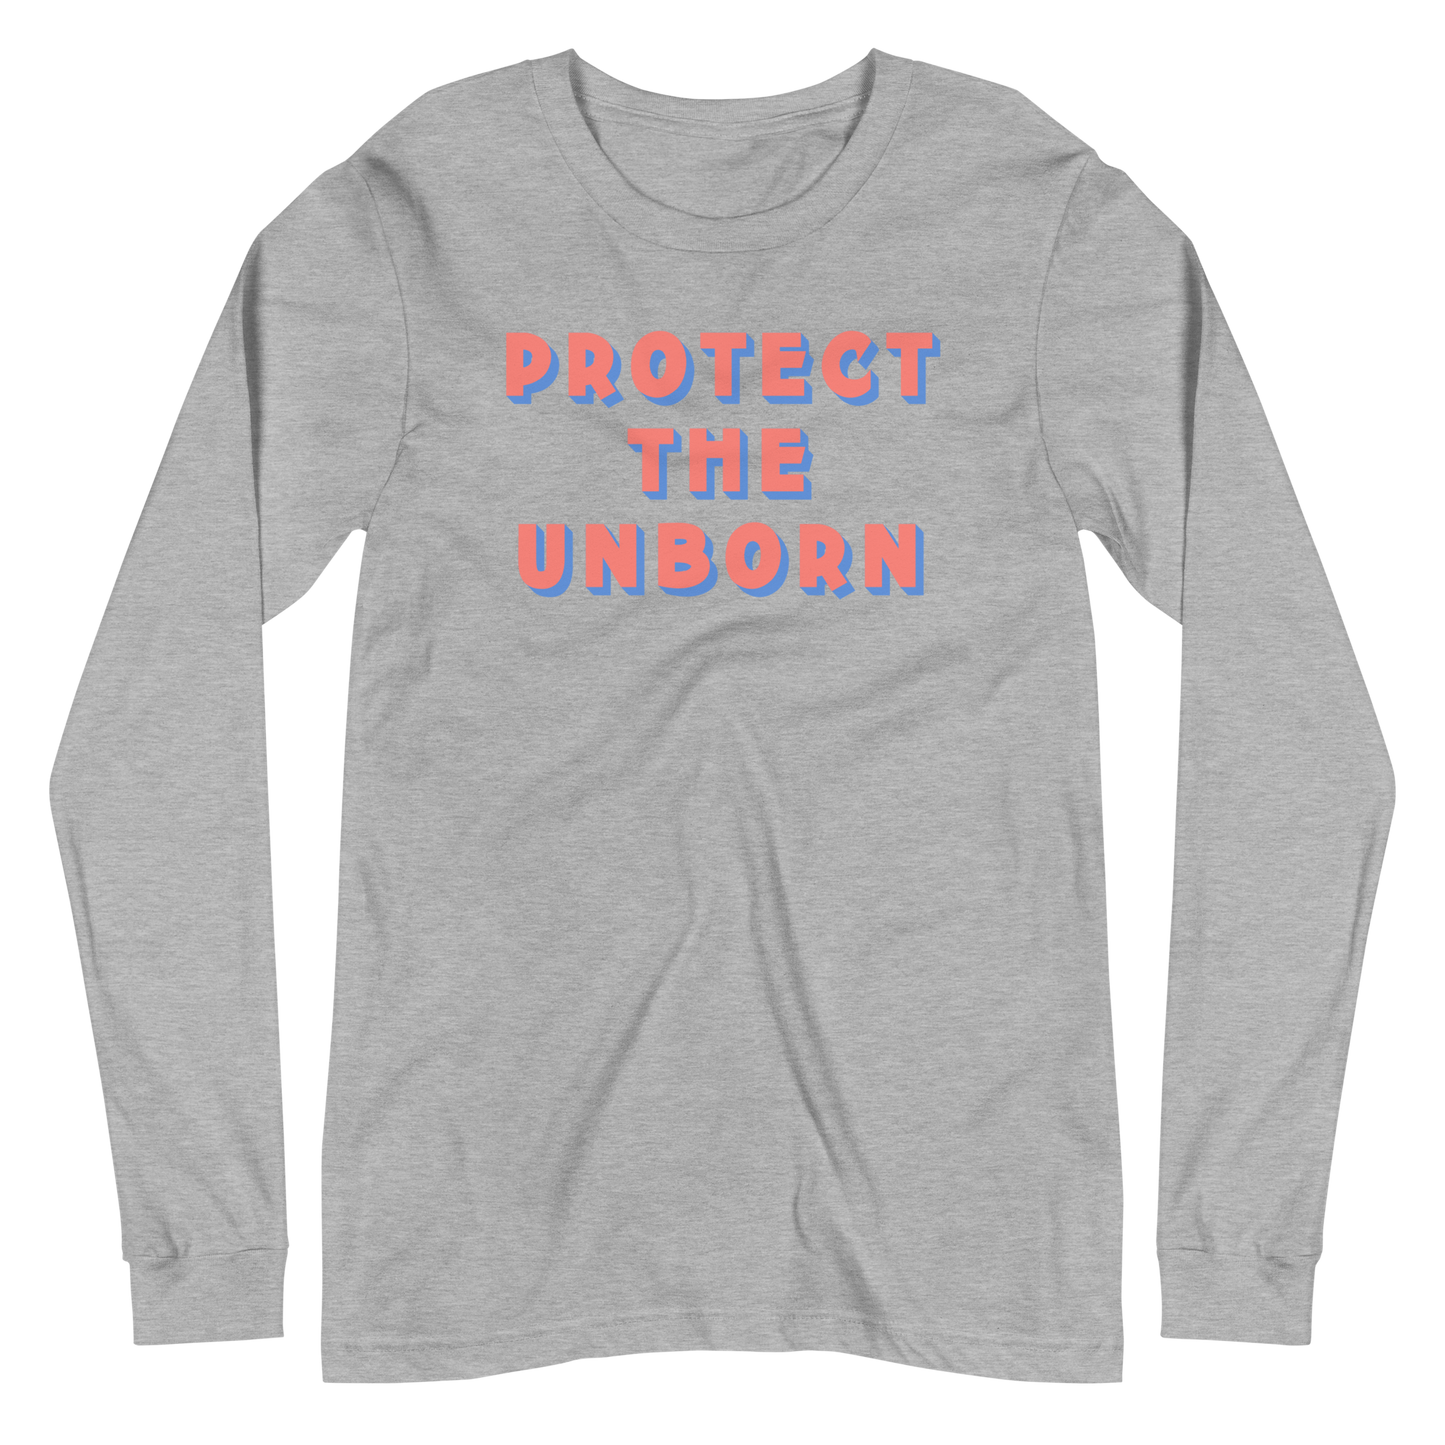 Protect The Unborn Long Sleeve Shirt